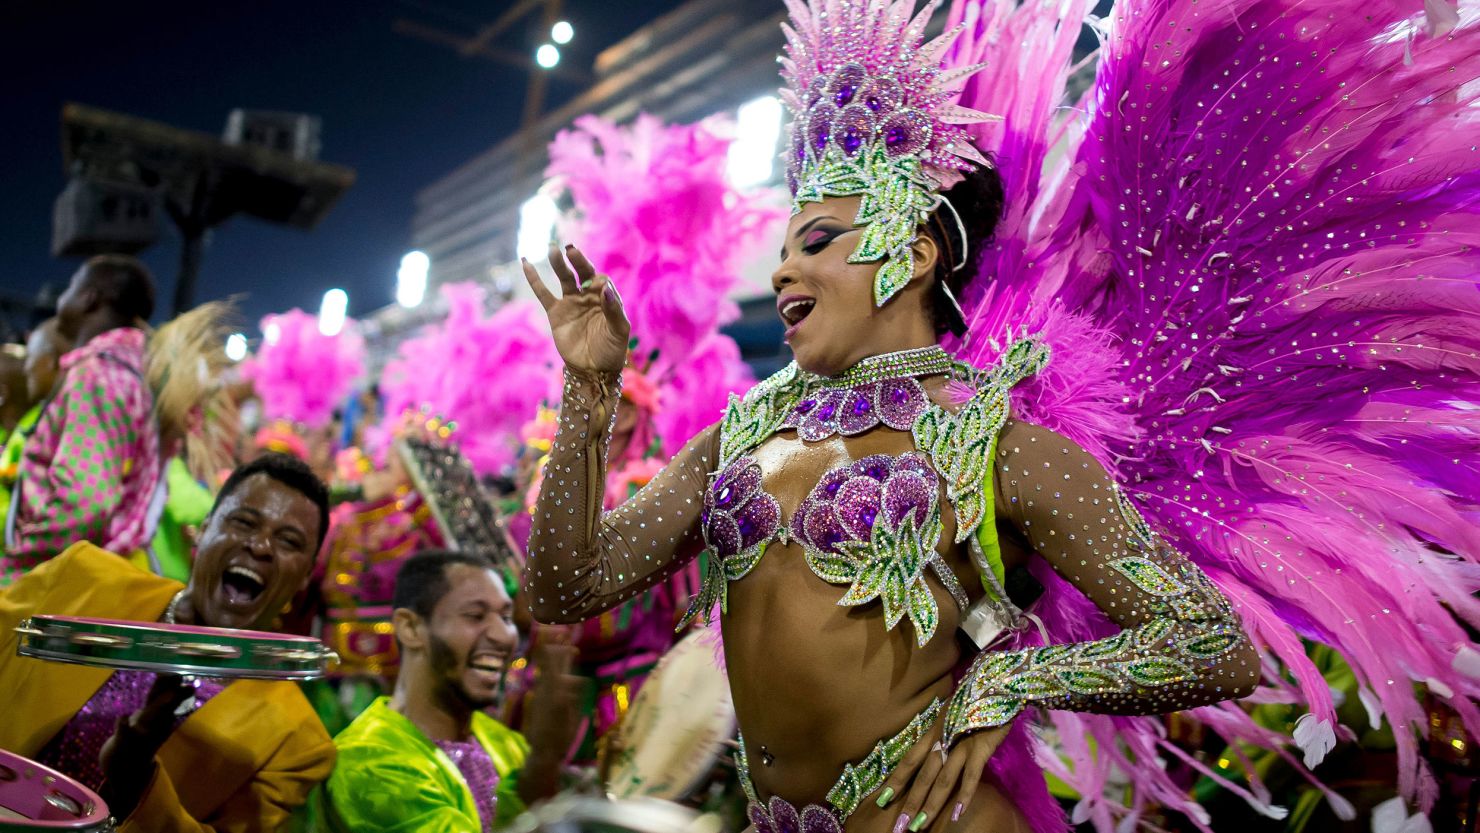 Paraders head to the Sambadrome on March 2, 2014, in Rio de Janeiro, Brazil. 